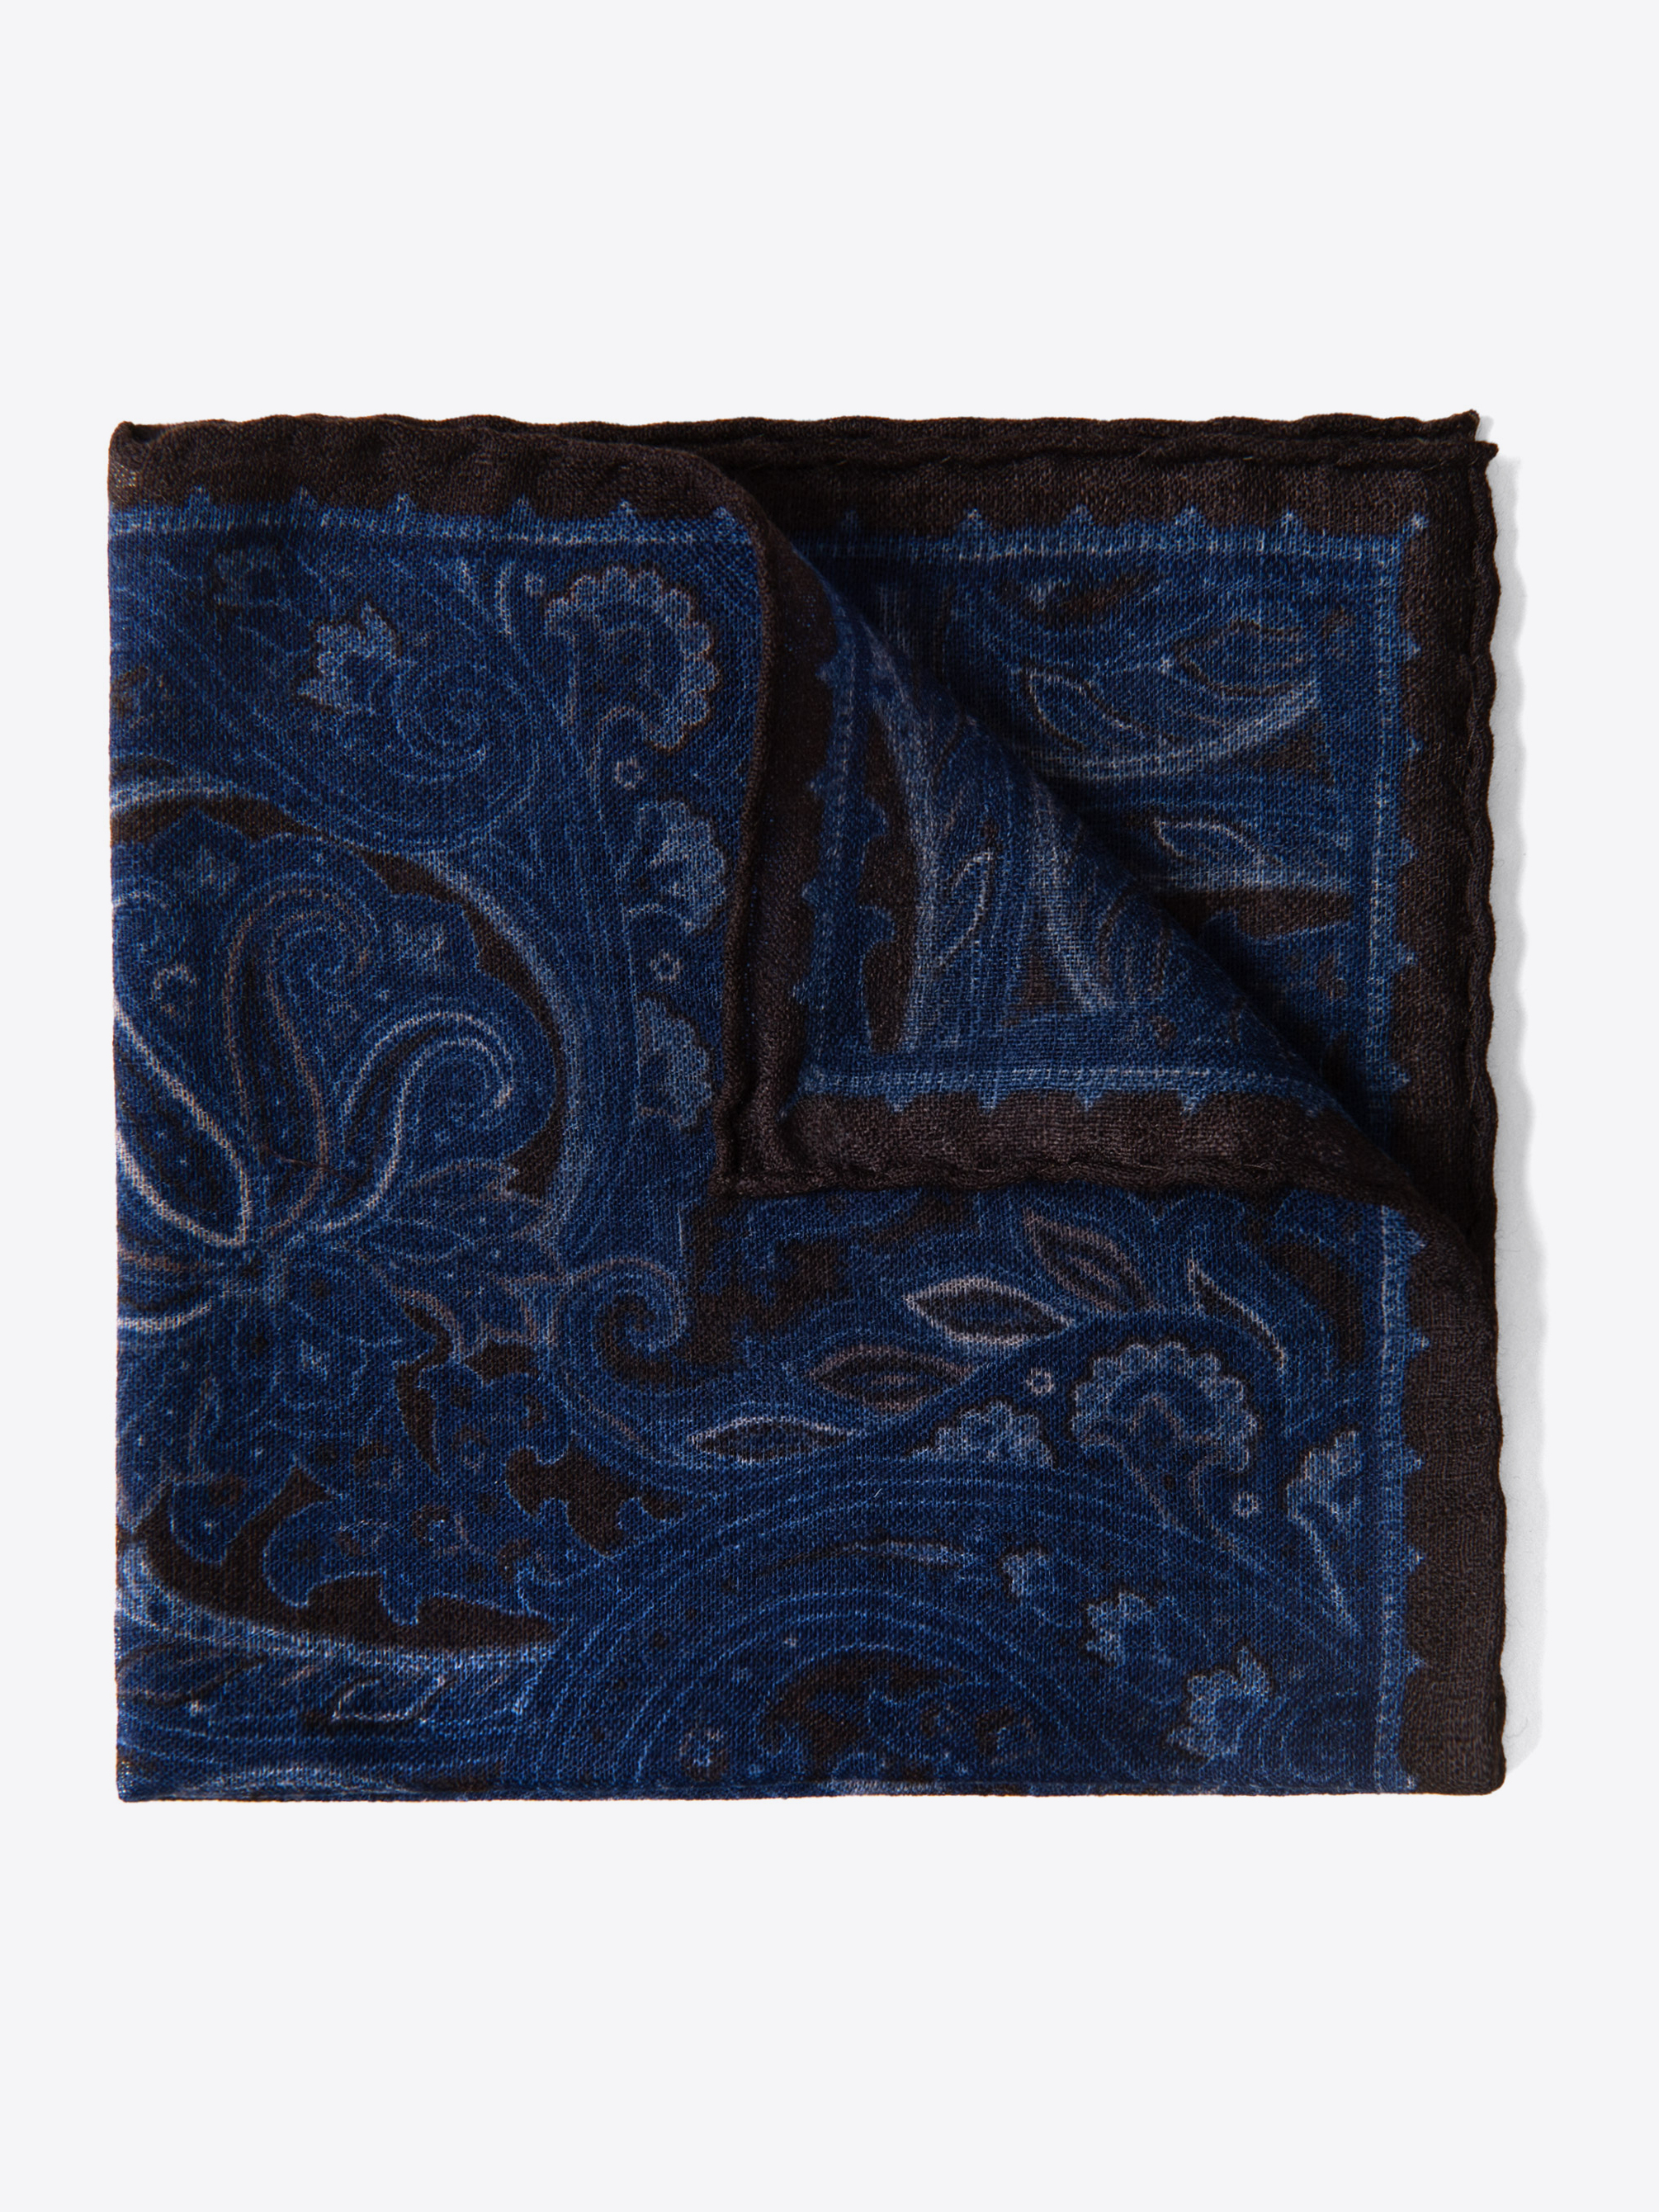 Zoom Image of Navy and Brown Paisley Gauze Wool Pocket Square